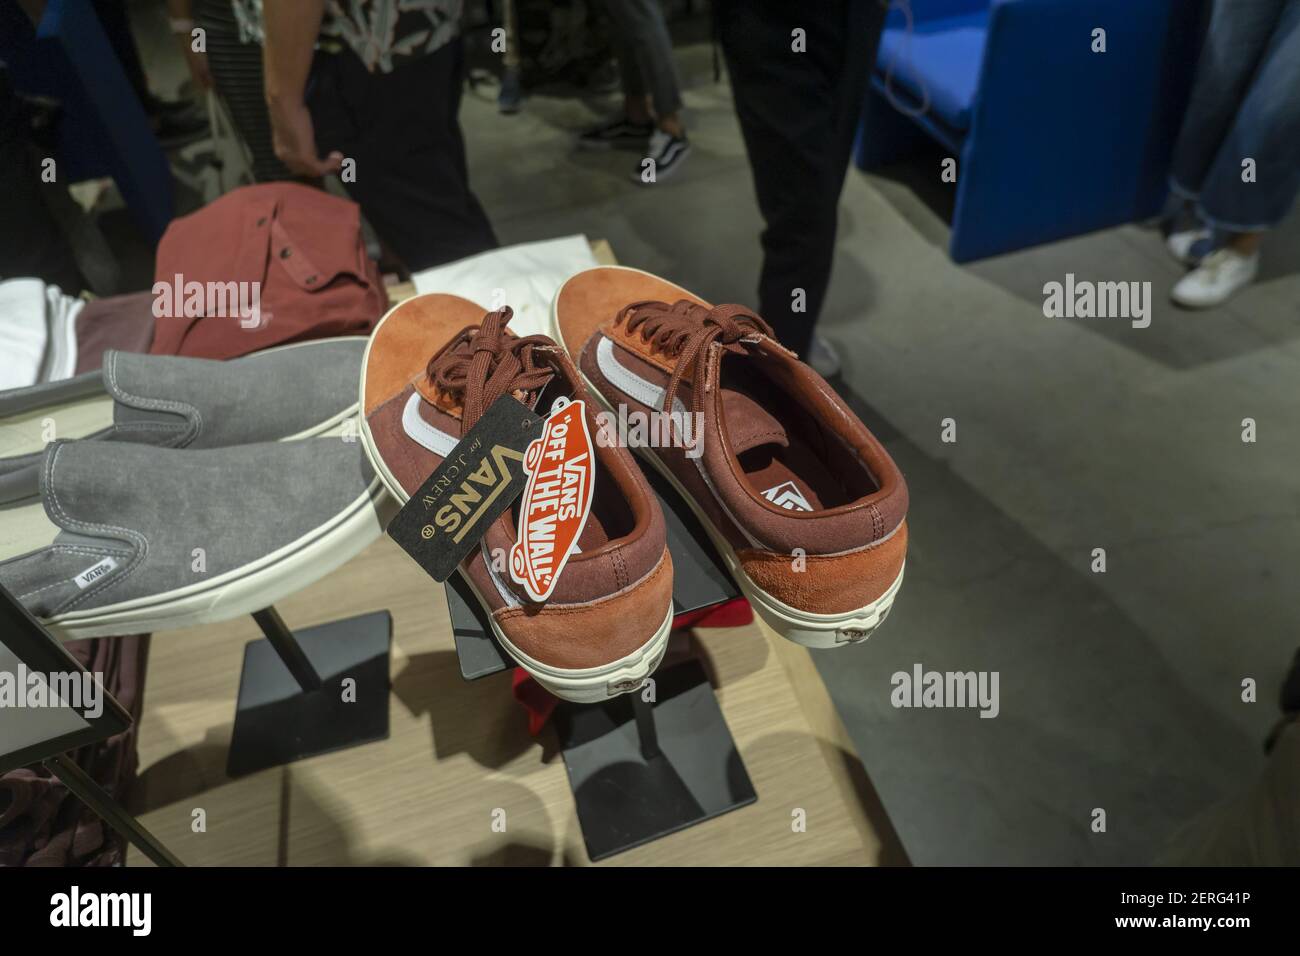 Vans brand sneakers on display the opening celebration of the new J. Crew  men's store in the Dumbo neighborhood of Brooklyn in New York on Wednesday,  August 8, 2018. The 2,100 square